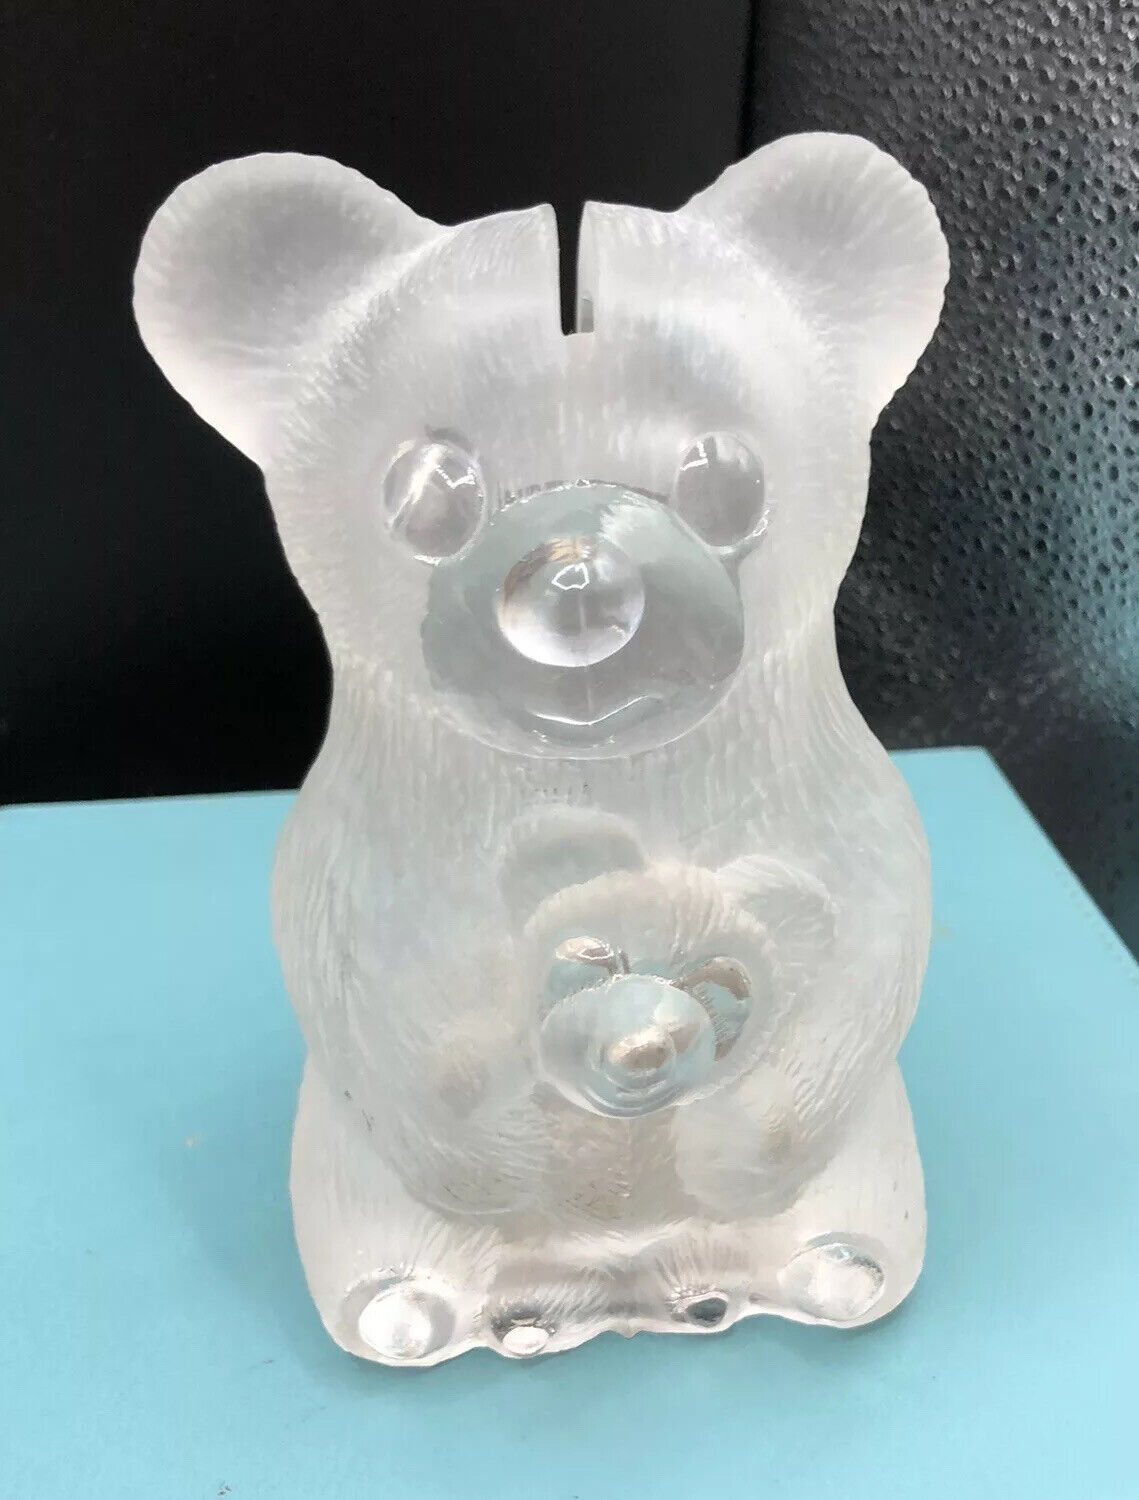 Unique Vintage Heavy Frosted Glass Teddy Bear Bank Figurine With Key Fun